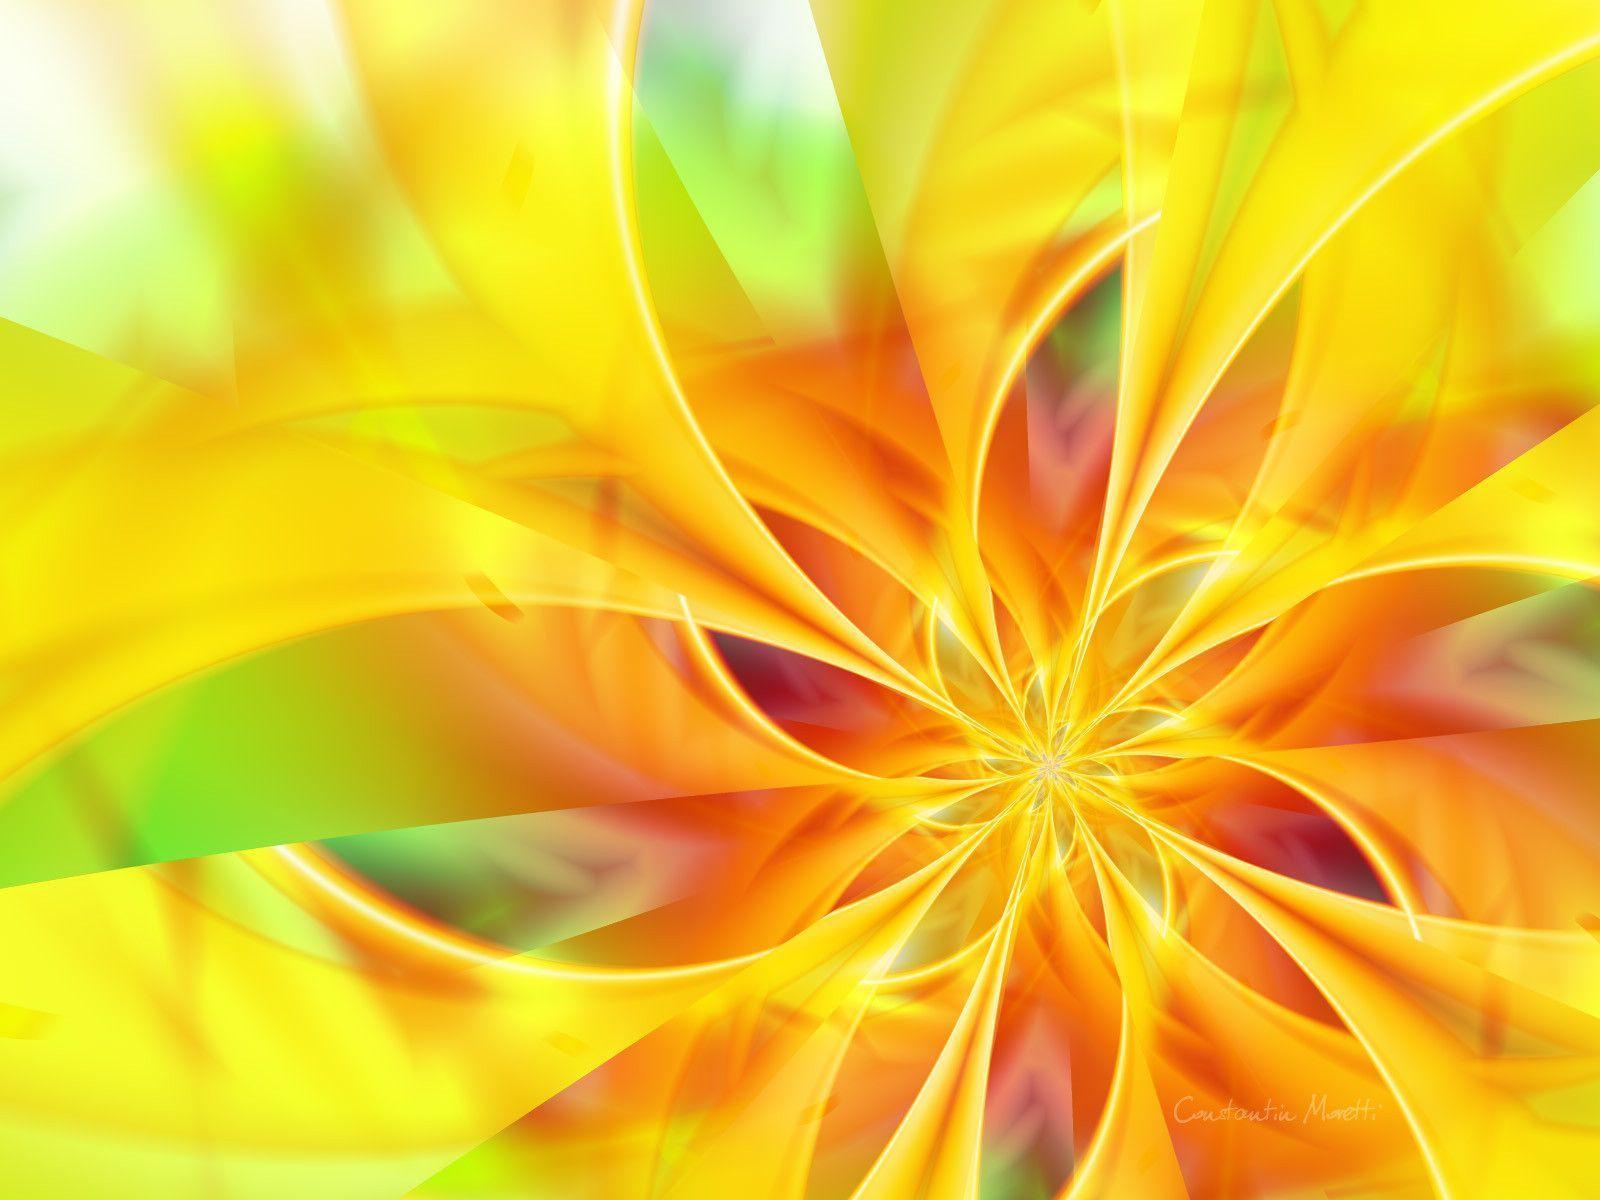 White And Yellow Abstract Wallpaper HD Cool 7 HD Wallpaper. lzamgs